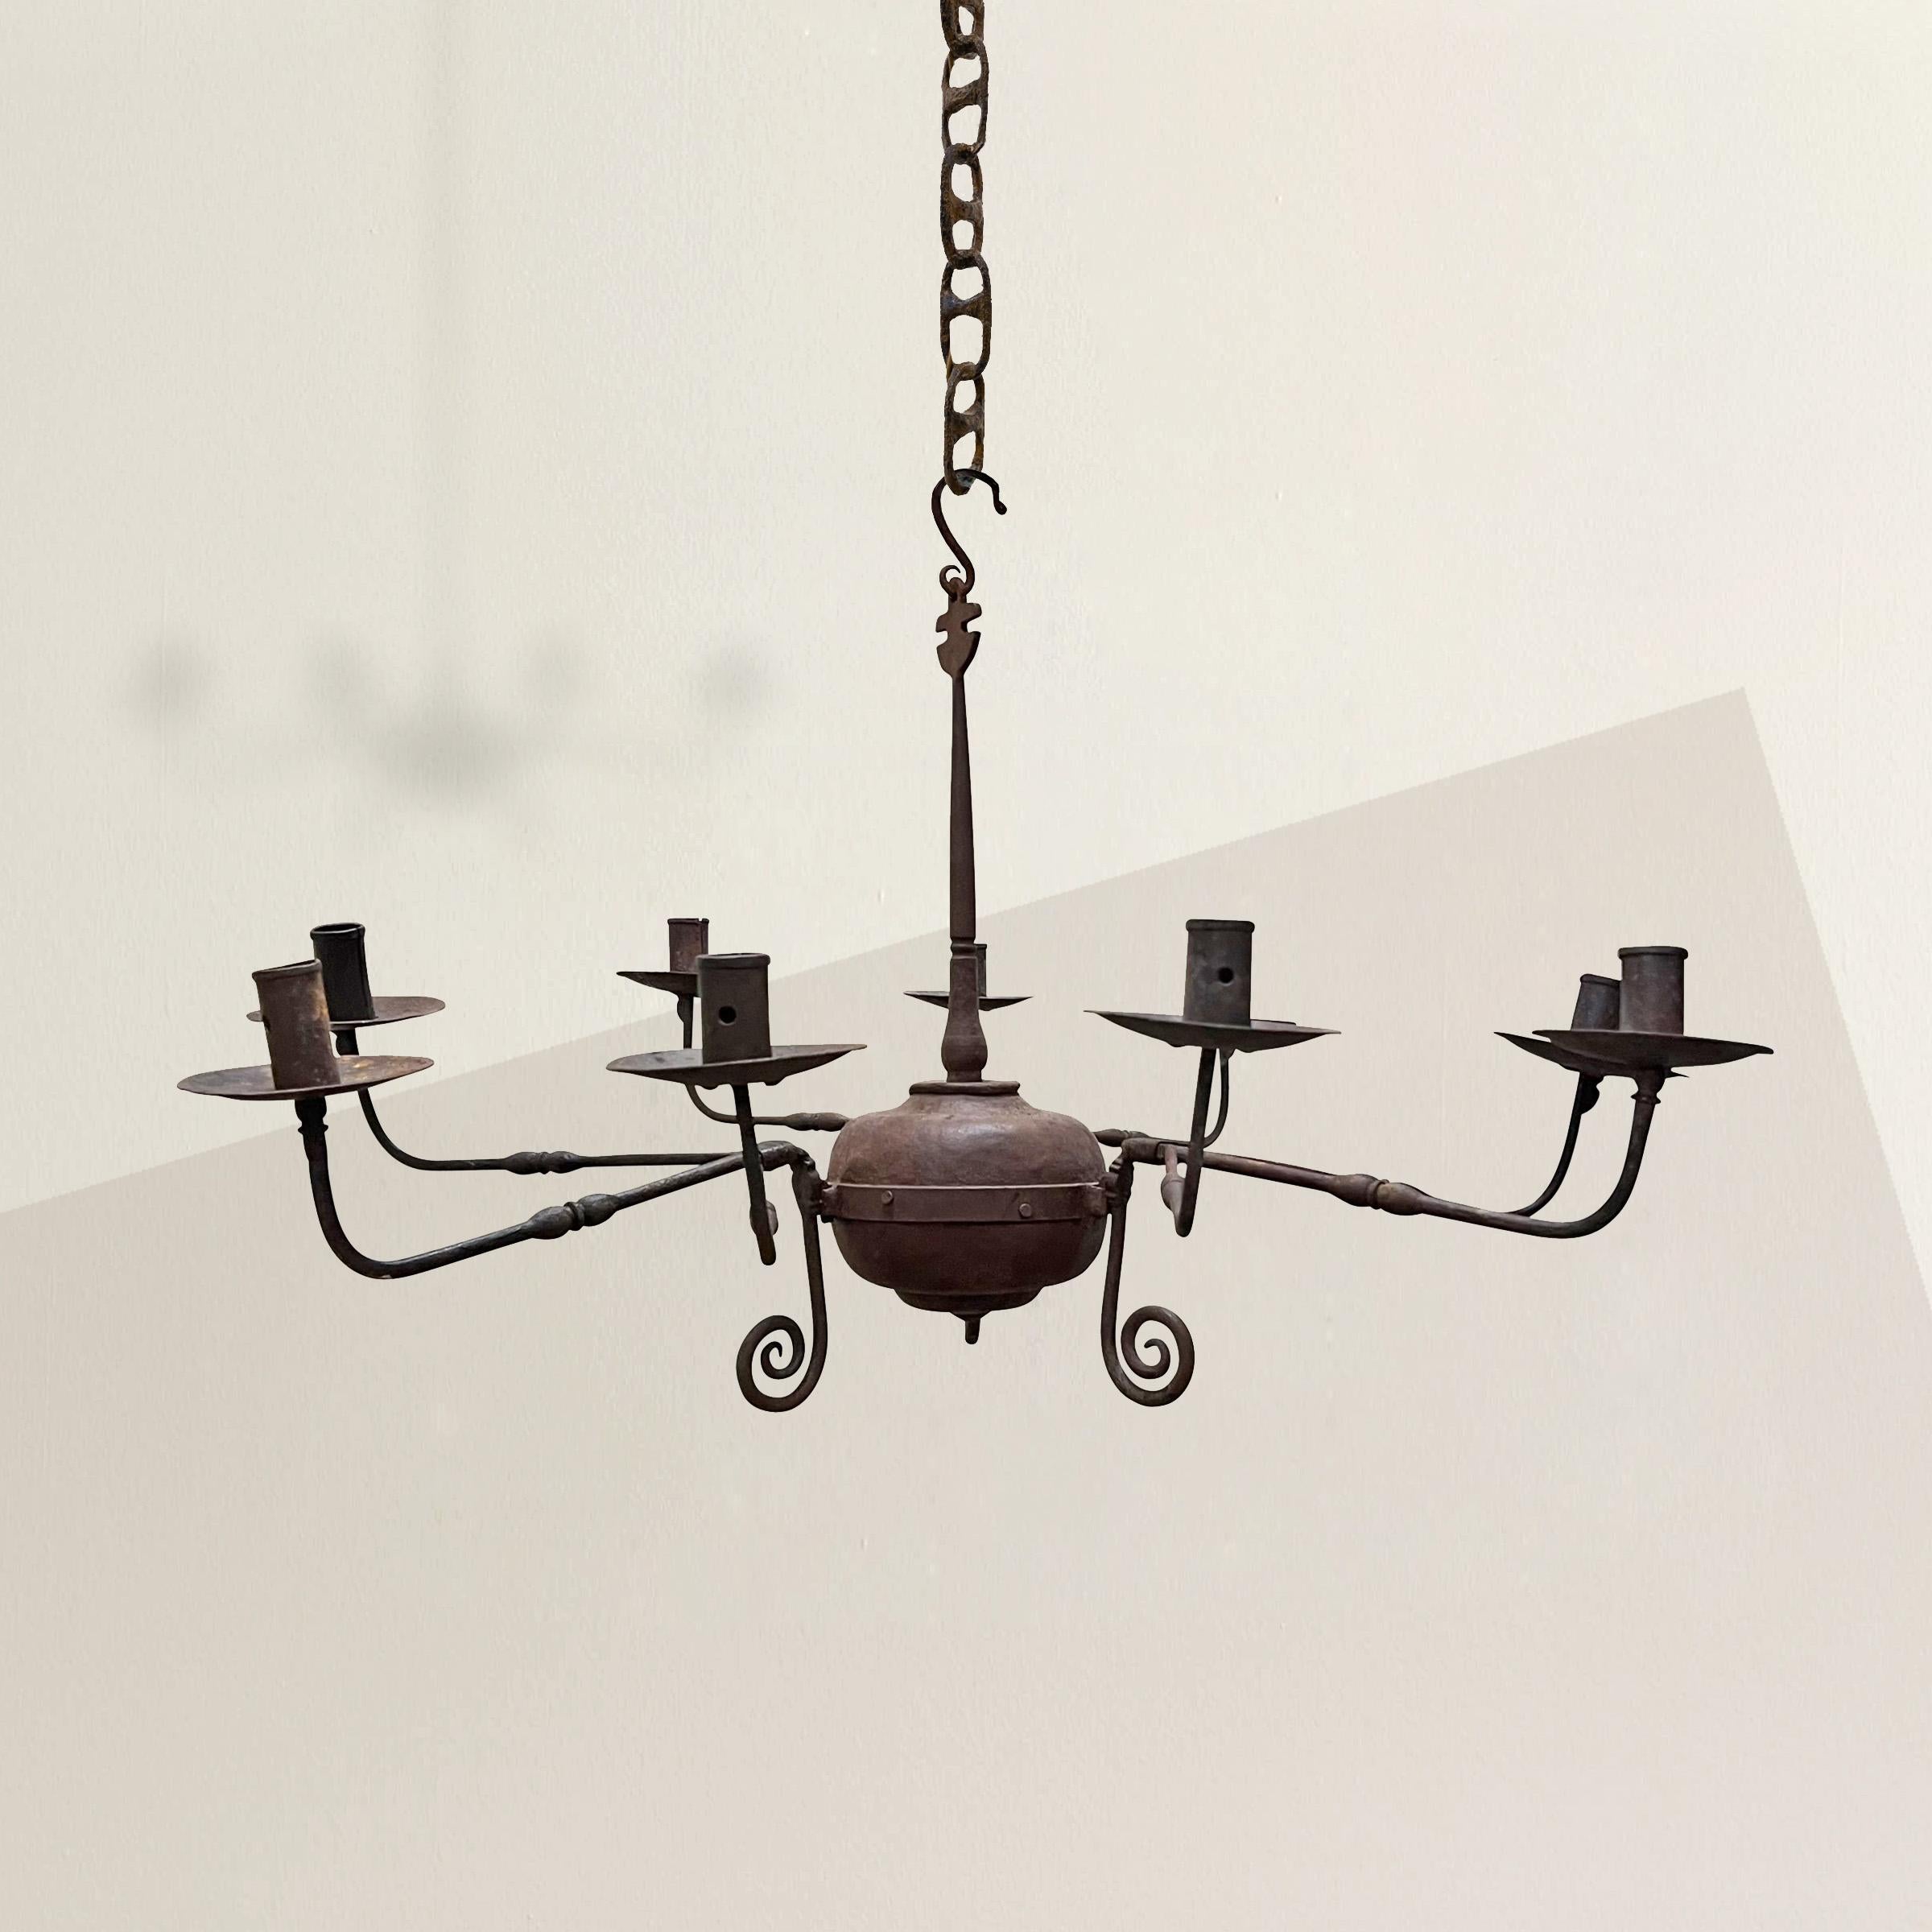 A whimsical and charming 20th century handwrought-iron nine-arm chandelier with a large central sphere with three arms radiating out from the center, each with three arms supporting nine candle cups. This piece would blend seamlessly into any modern